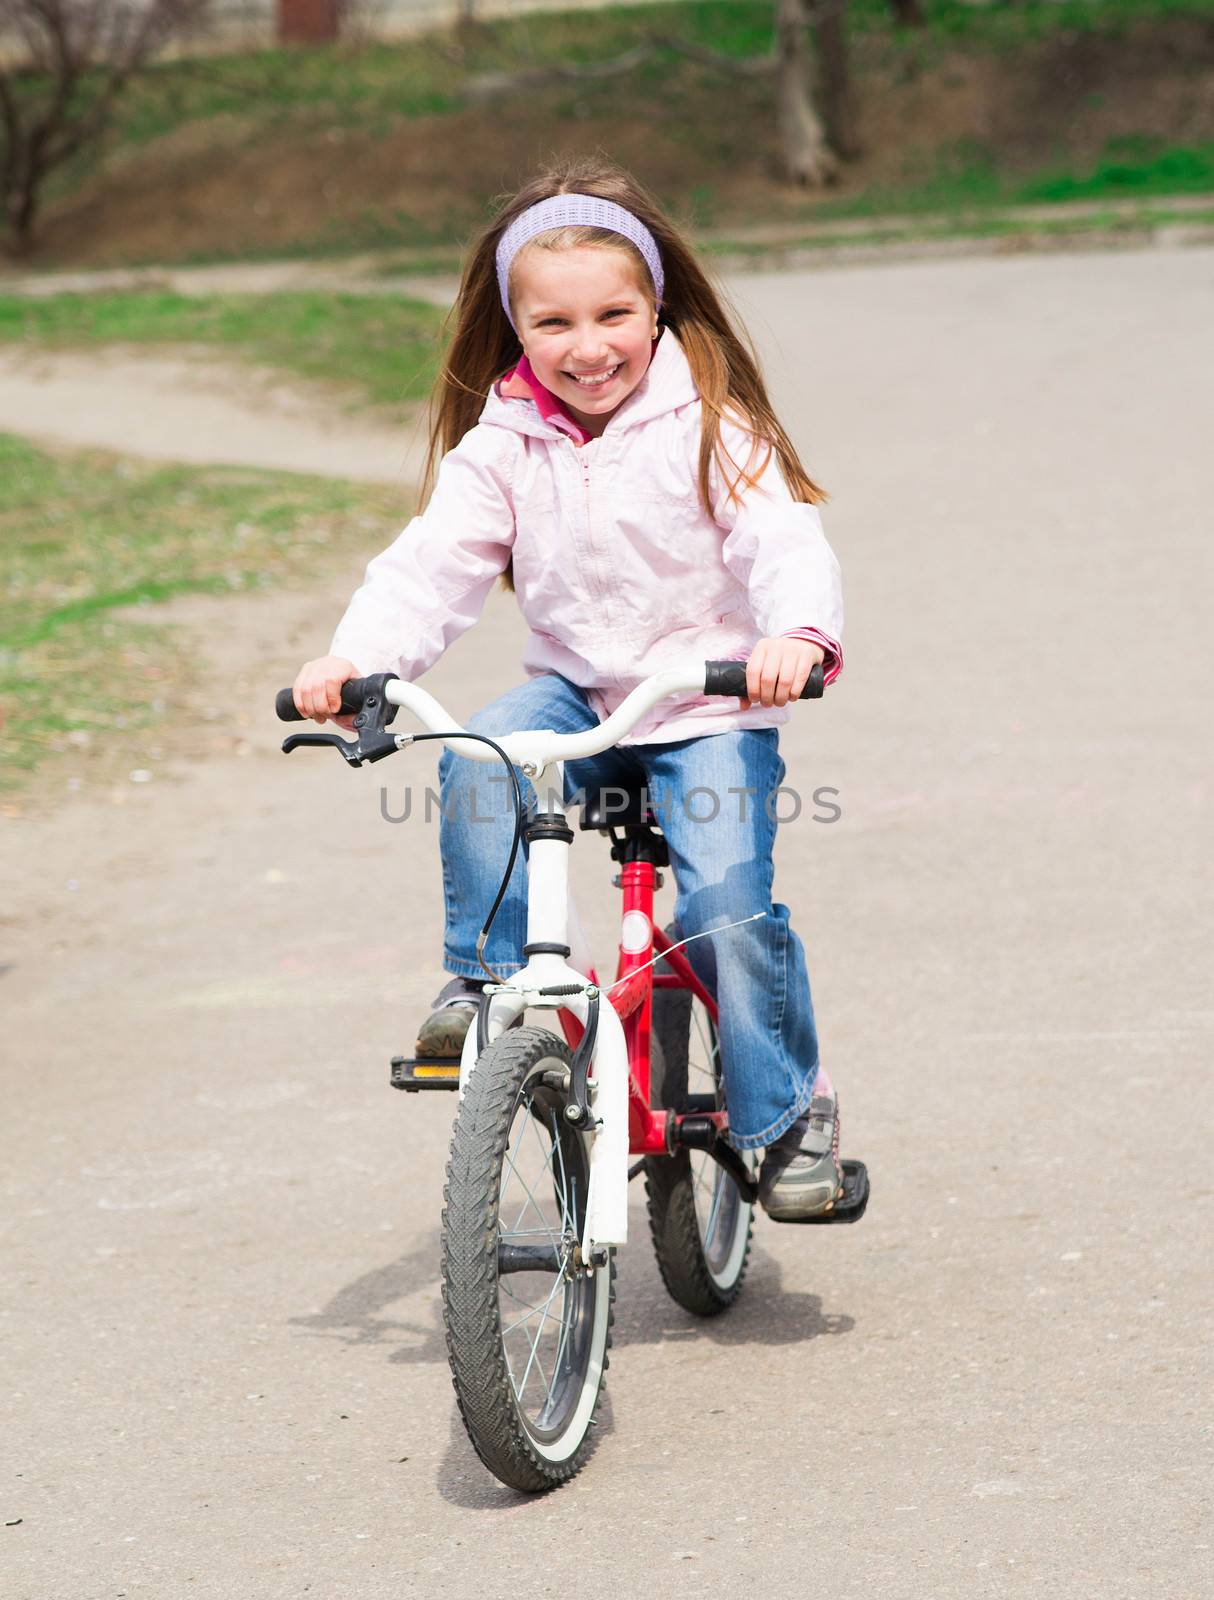 Smiling little girl with bicycle on road